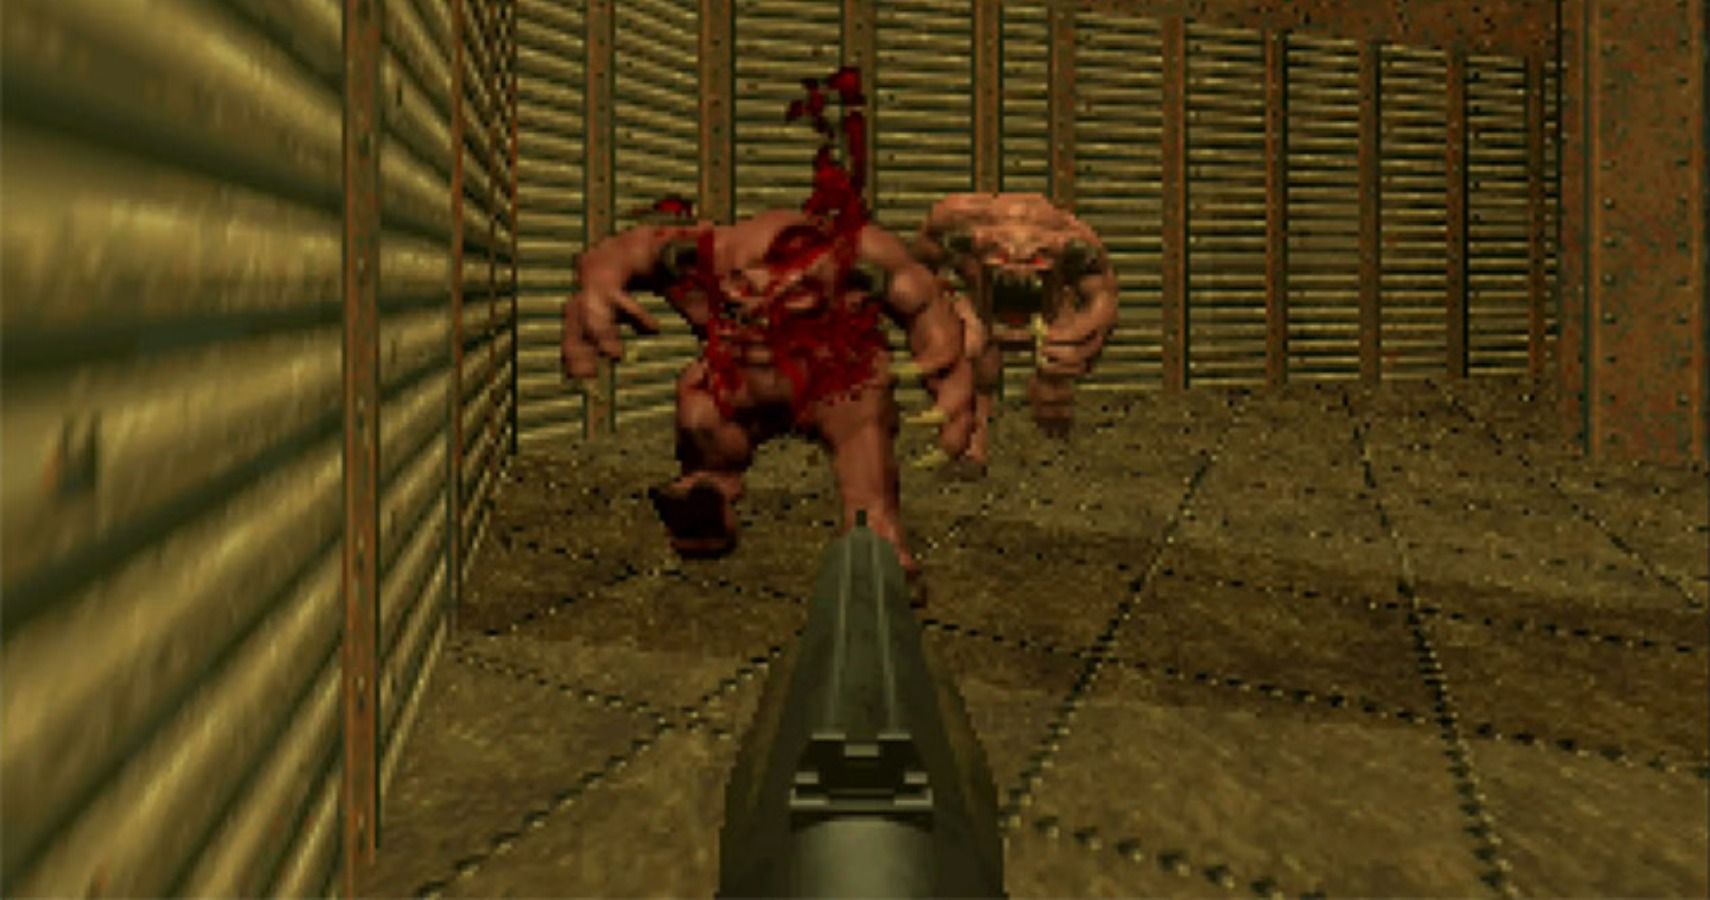 Even Doom 64 Is Making A Comeback If This Pegi Rating Is Real